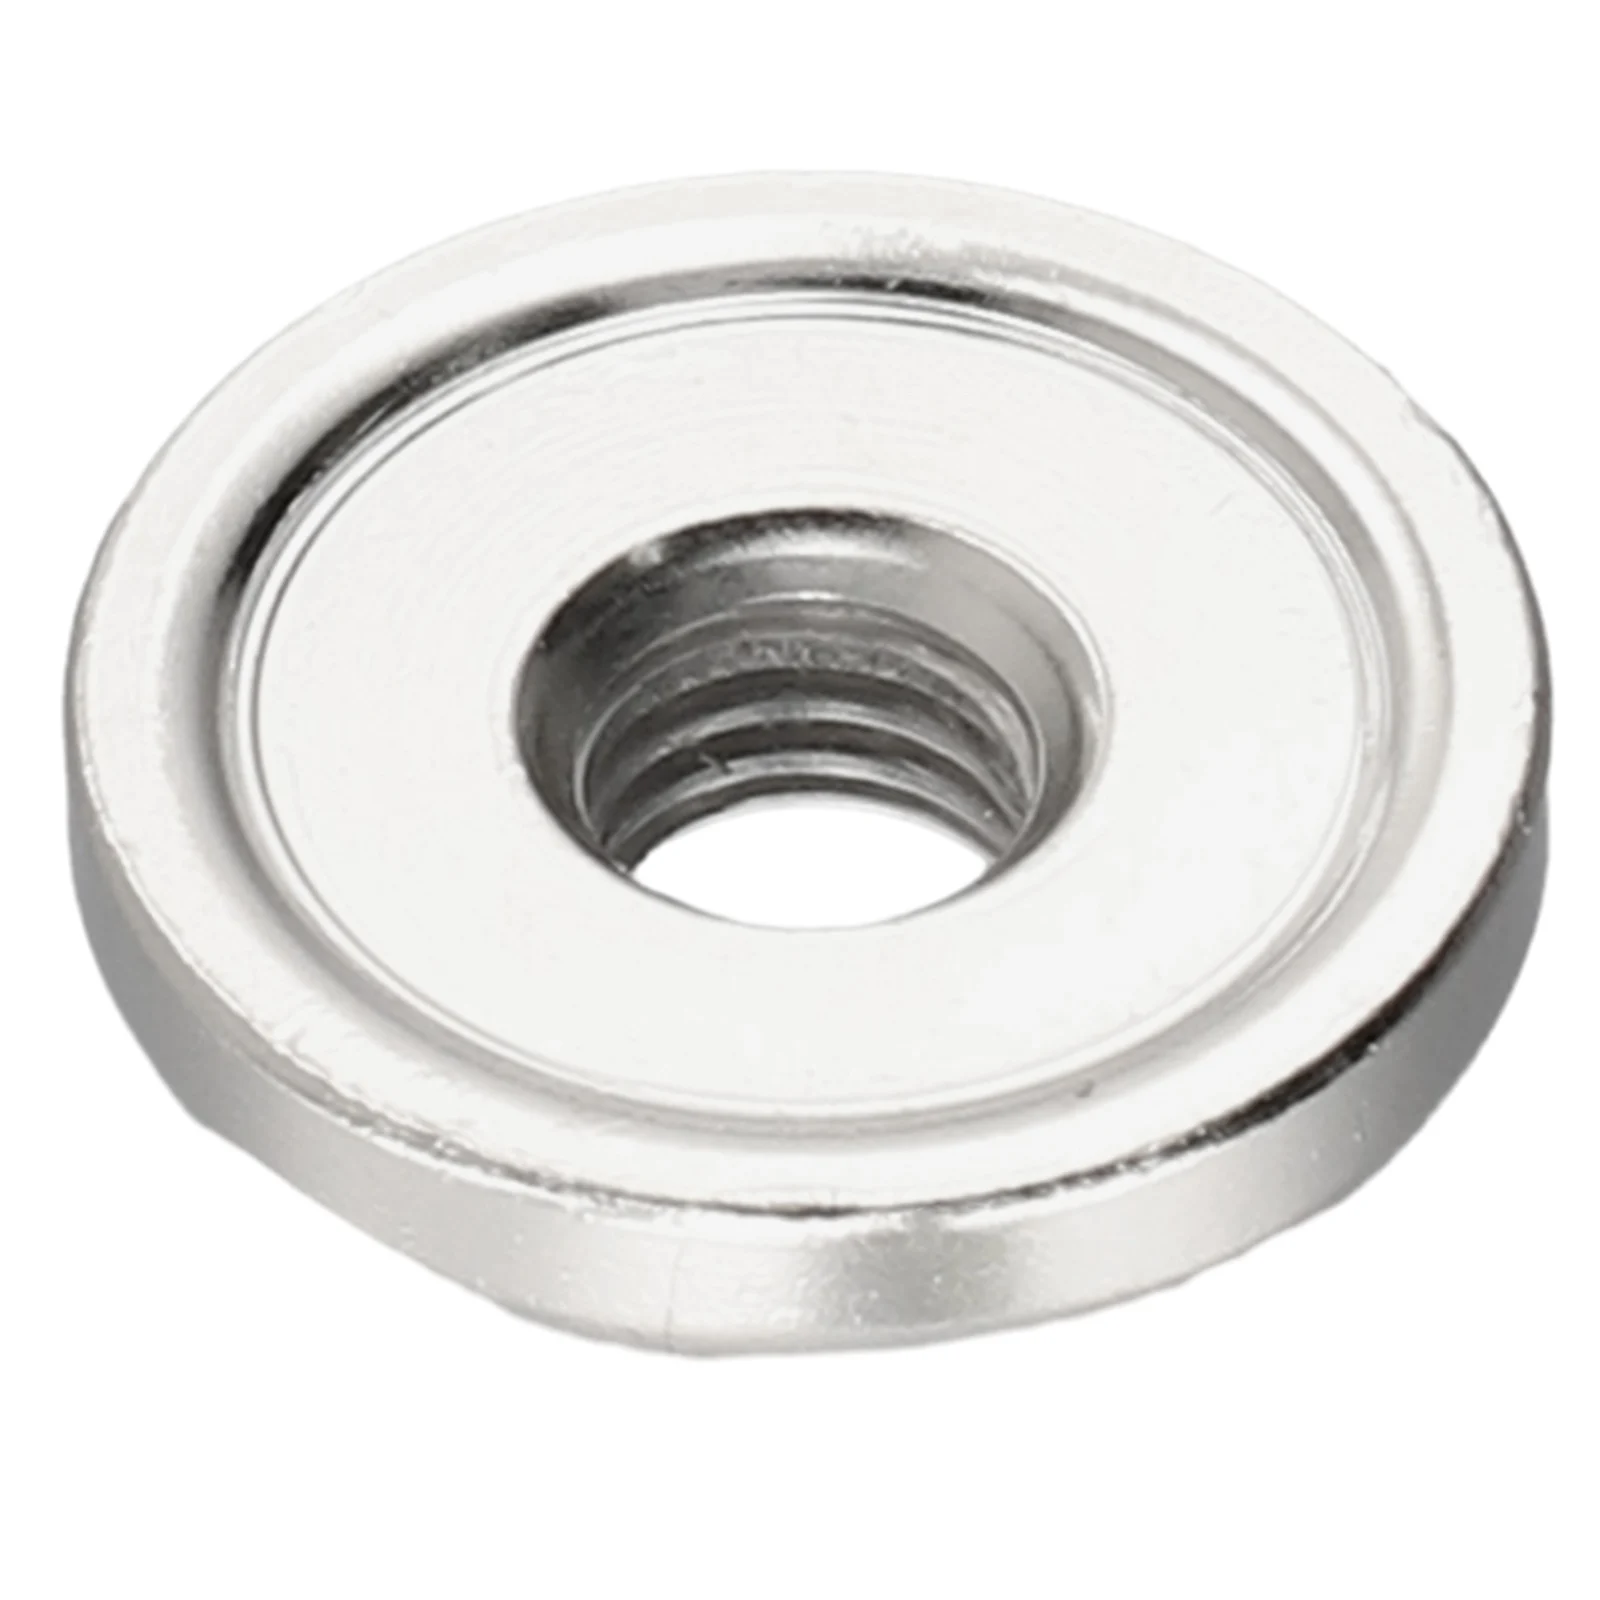 Durable Practical Angle Grinder Nut Replace Silver Stainless Steel 1 Piece Tool 1pc Anti-rust Part Quick Clamp